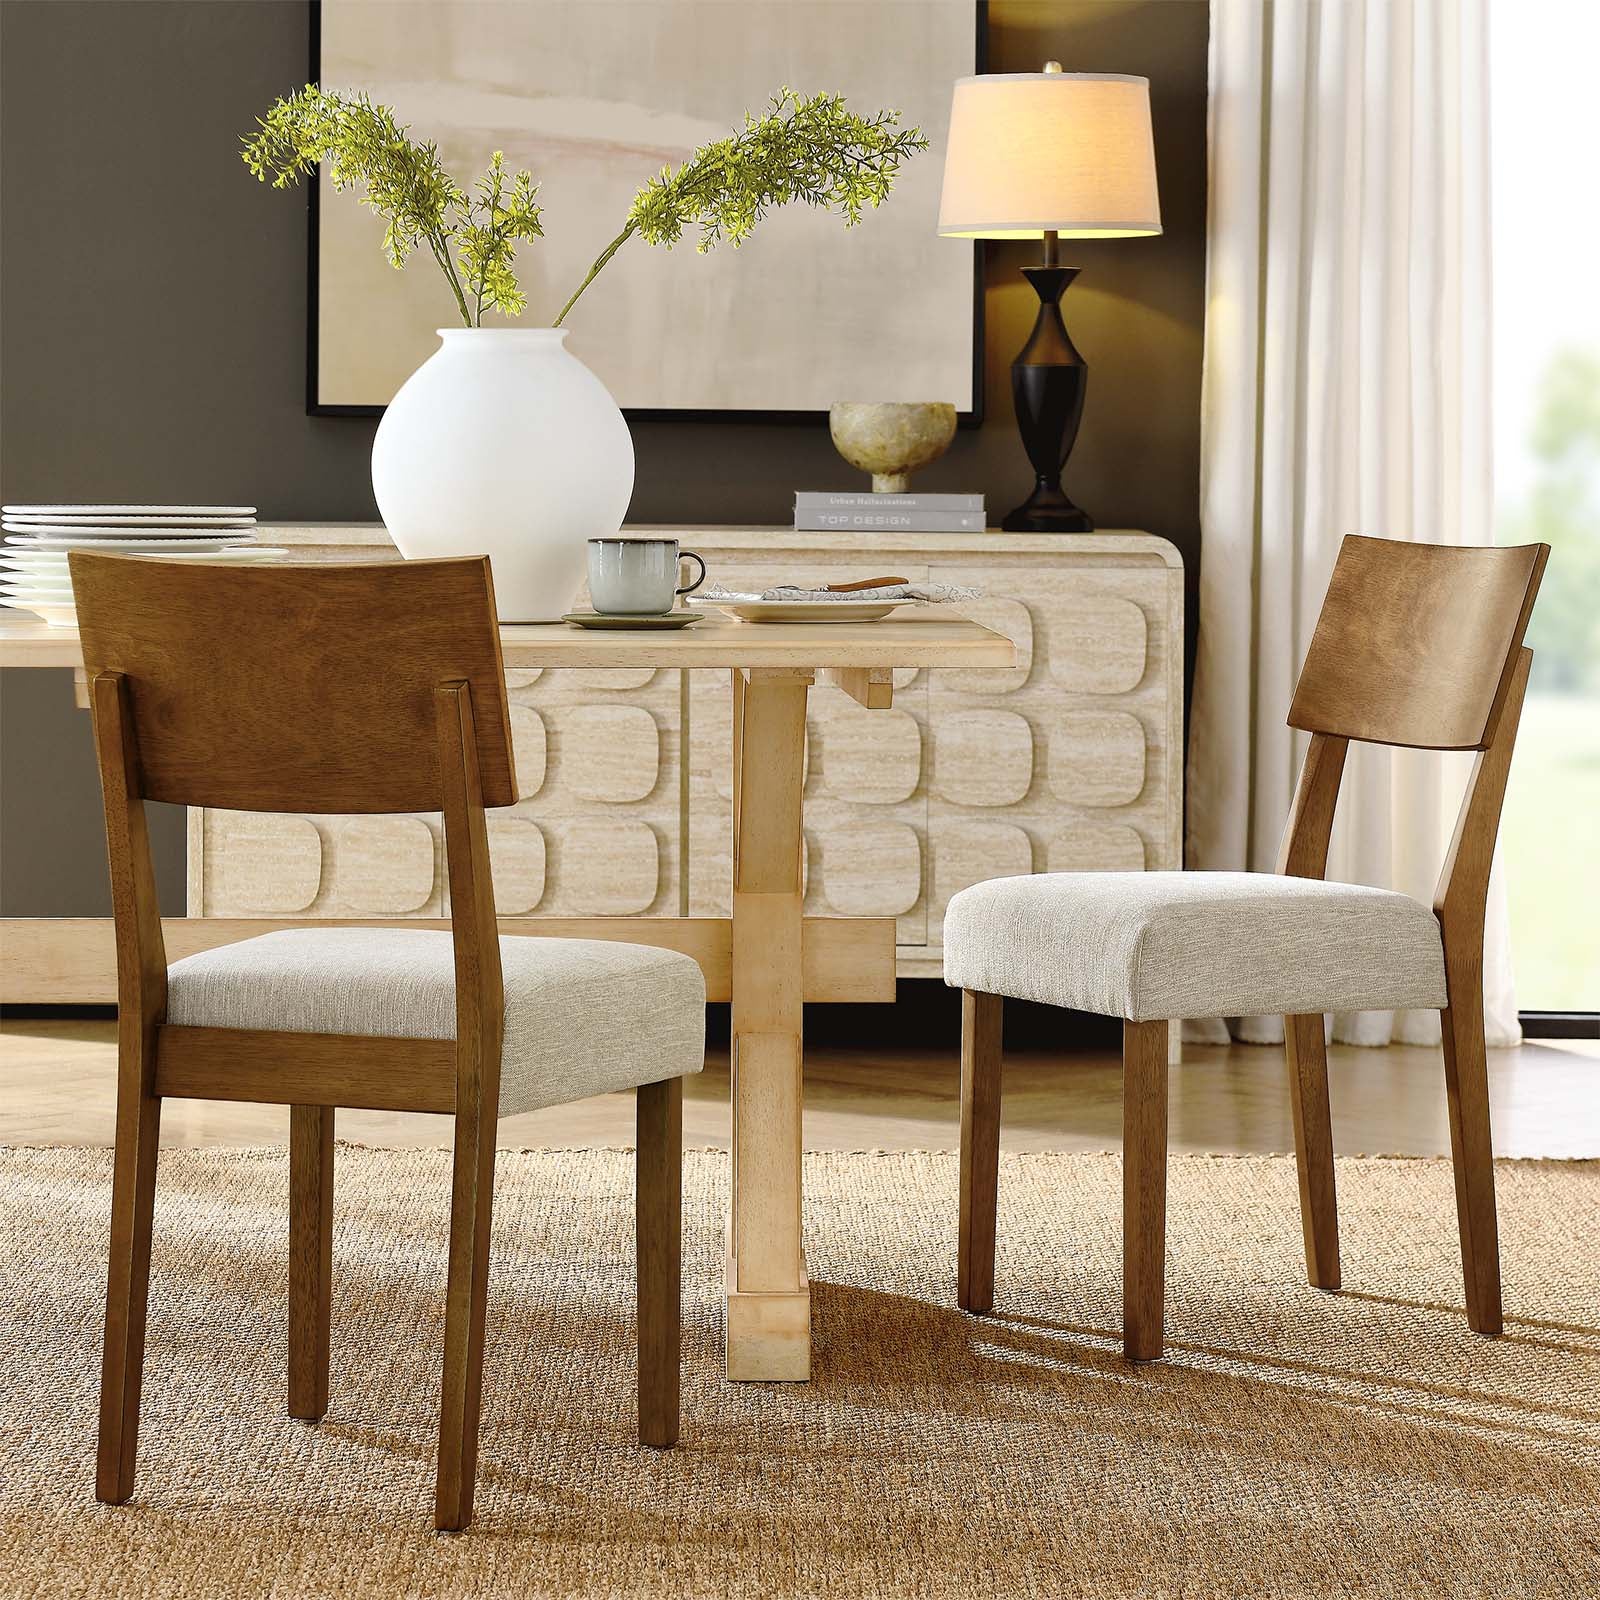 Pax Wood Dining Side Chairs - Set of 2